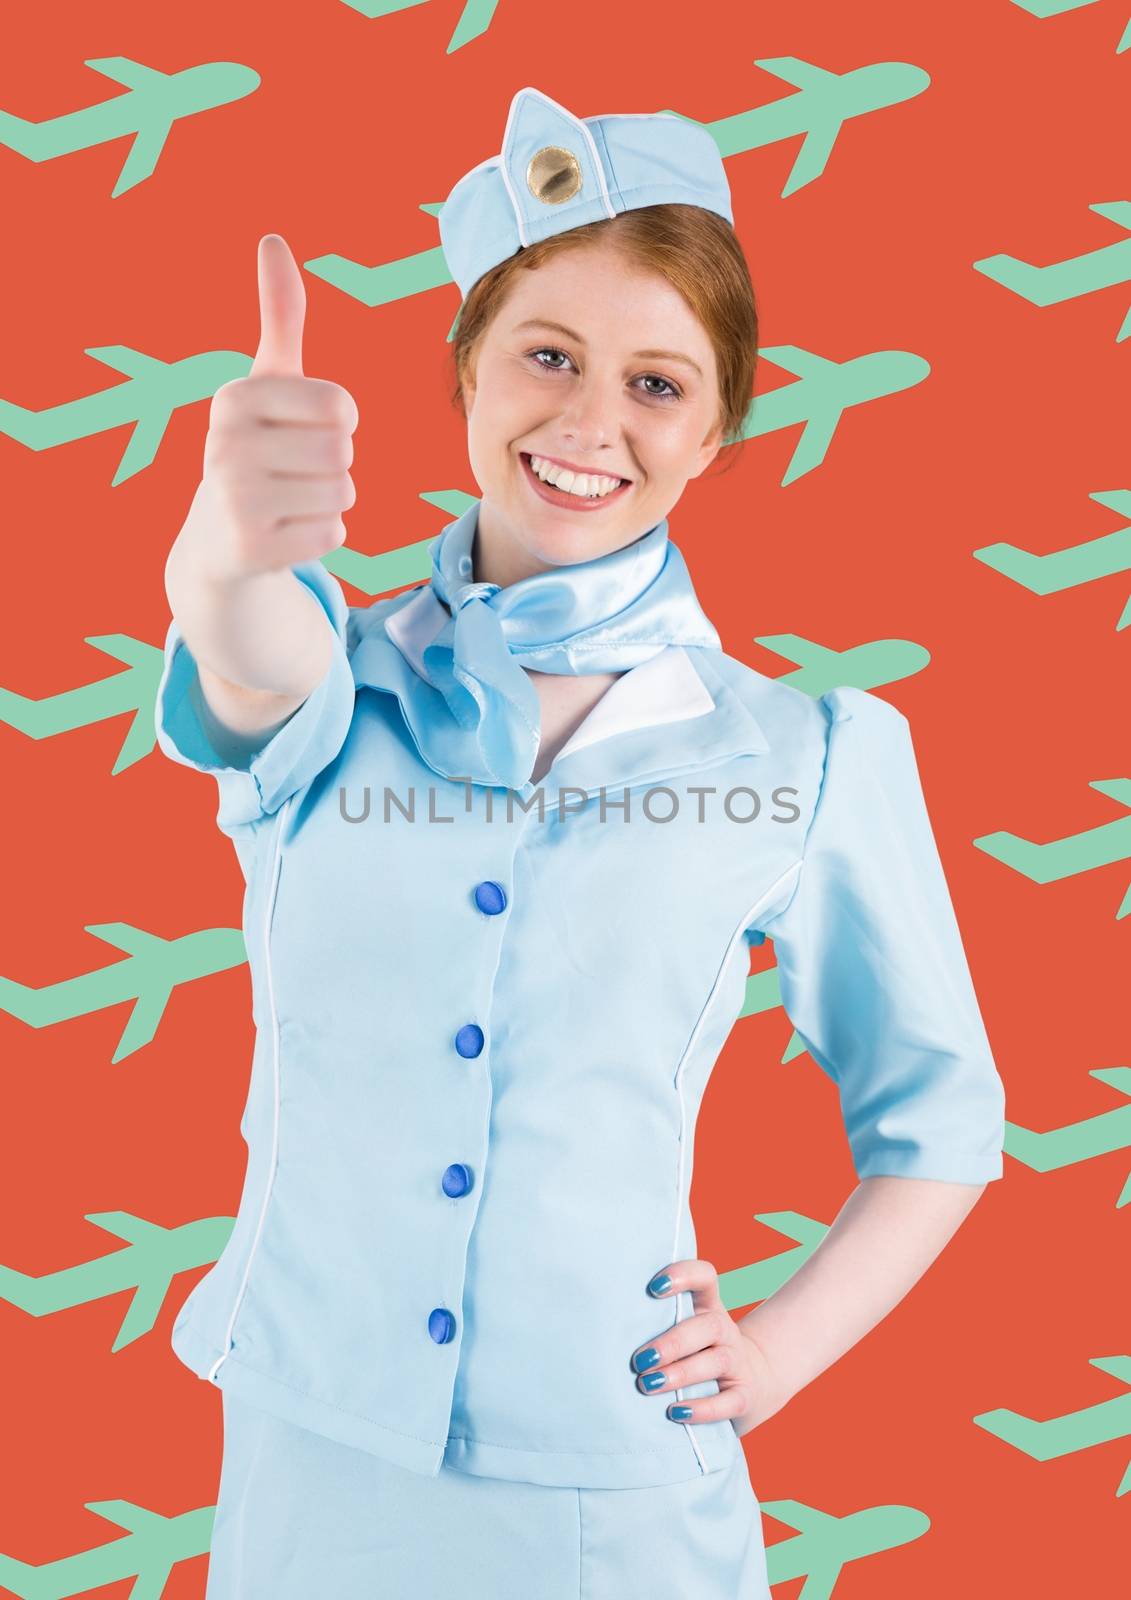 Digital composite of Travel agent against a red background with blue plans 